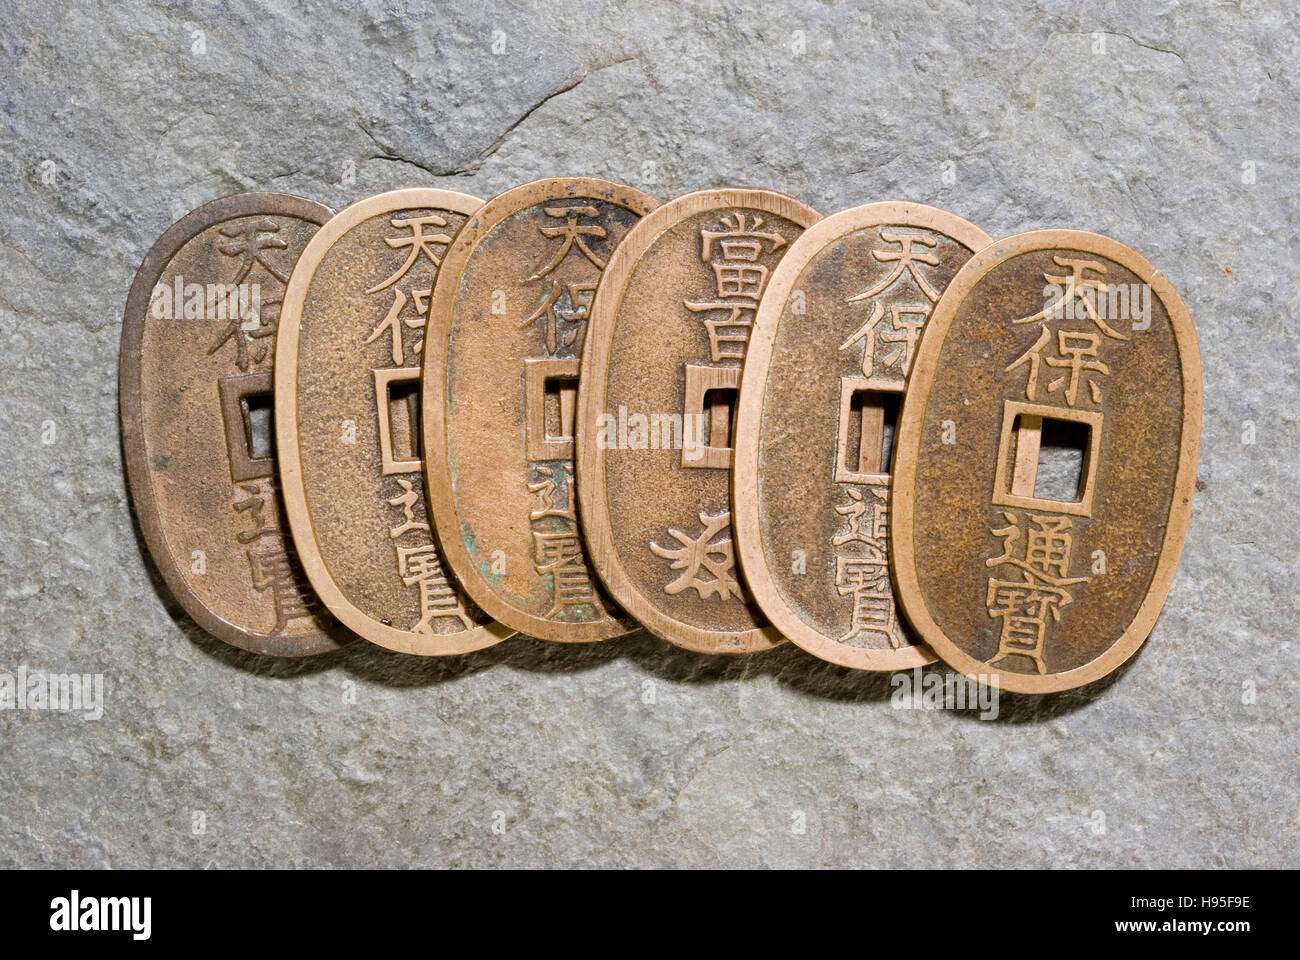 Old Japanese coins Stock Photo